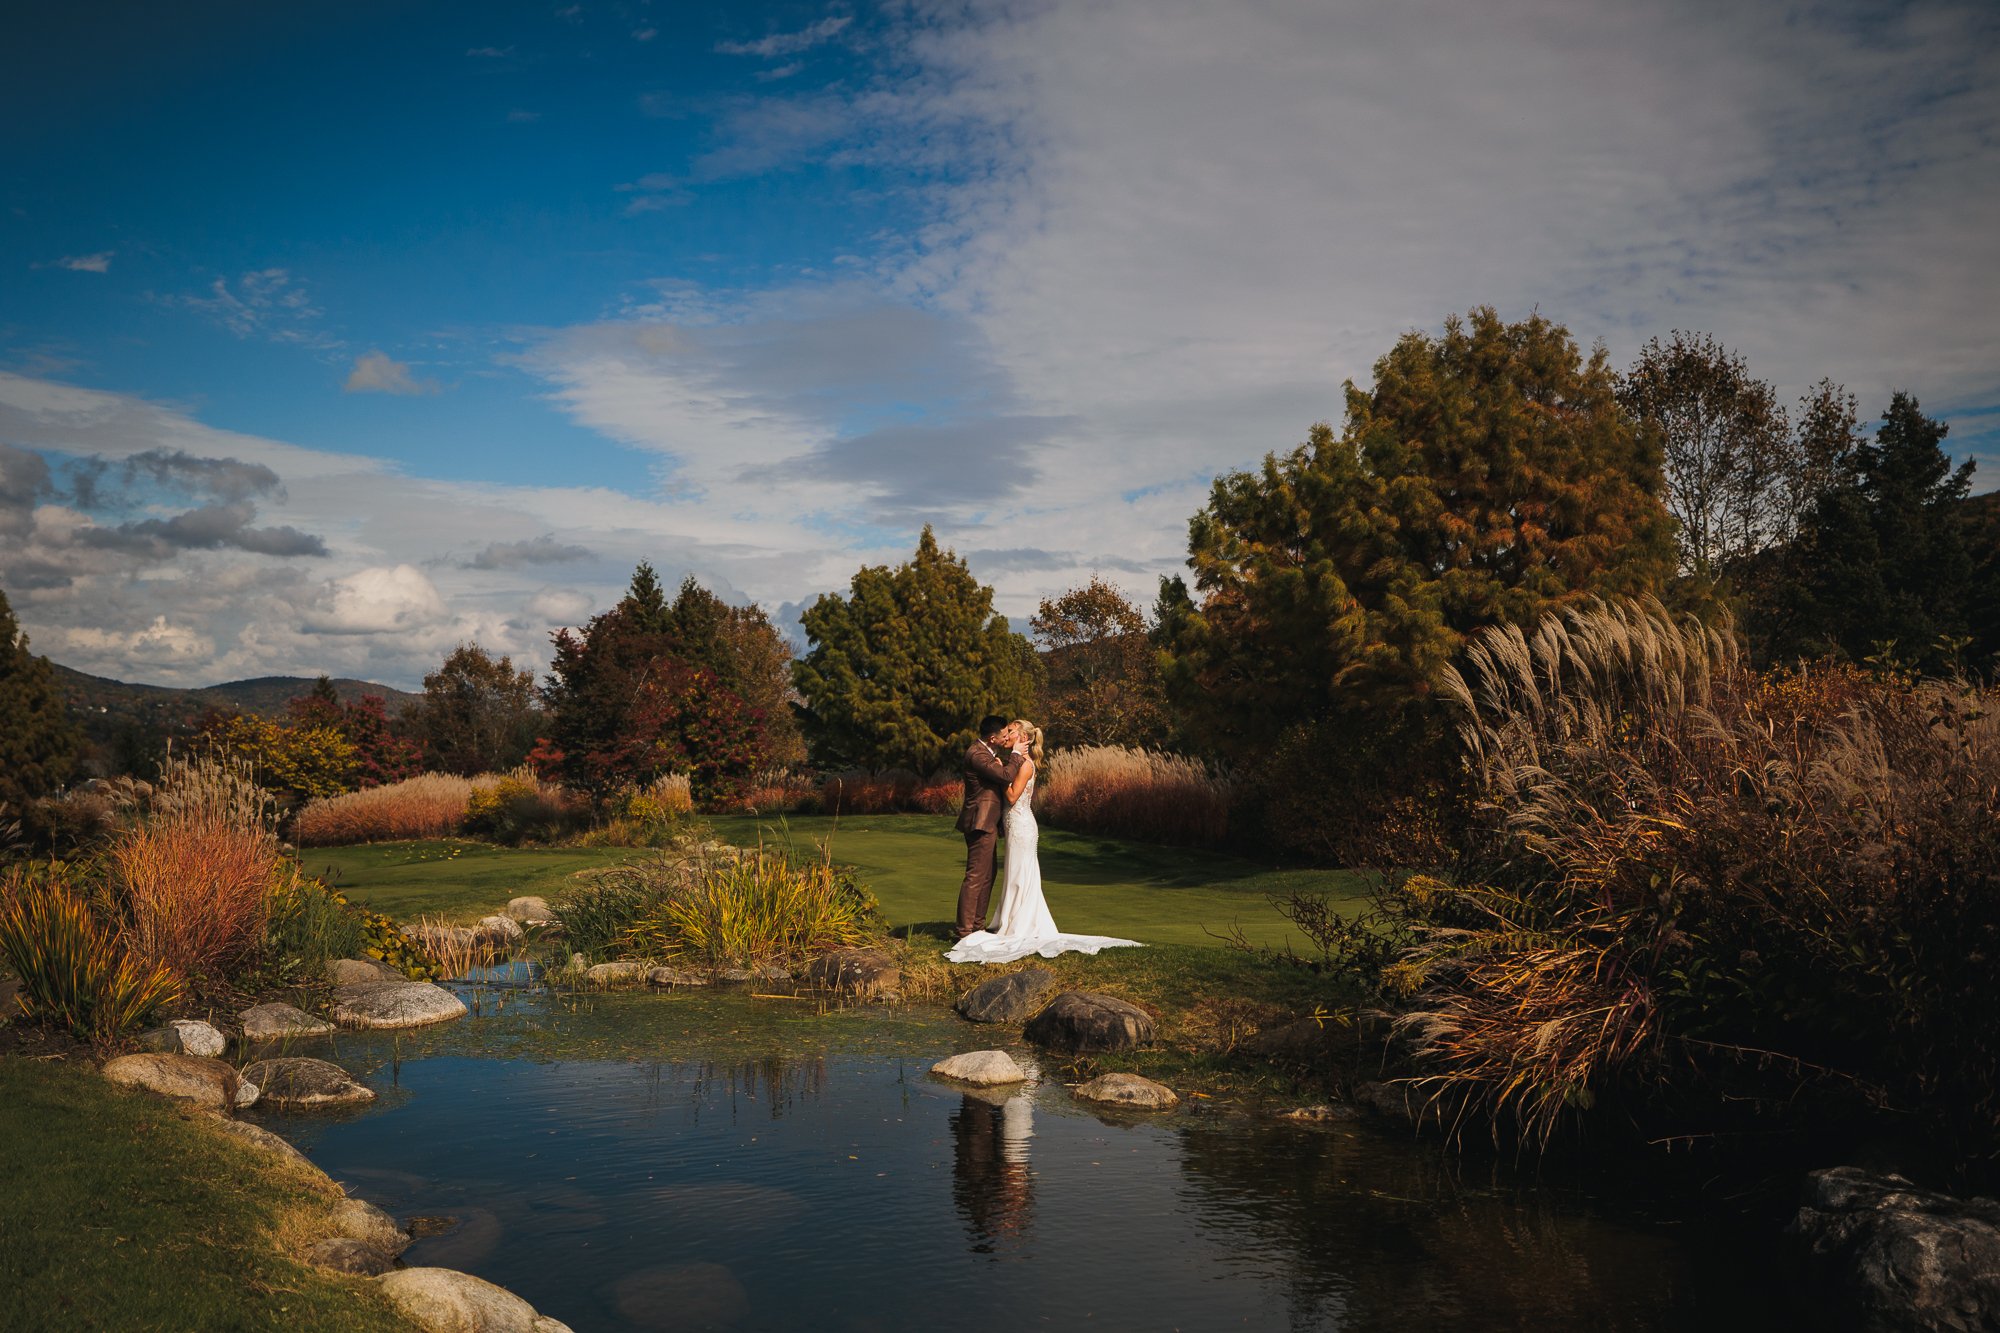  New Jersey Wedding Photographer   GARRET TORRES PHOTOGRAPHY    ‘He became our best friend throughout the process of the wedding and remained calm, directed well, and provided photos that blew us away.’  -DB 